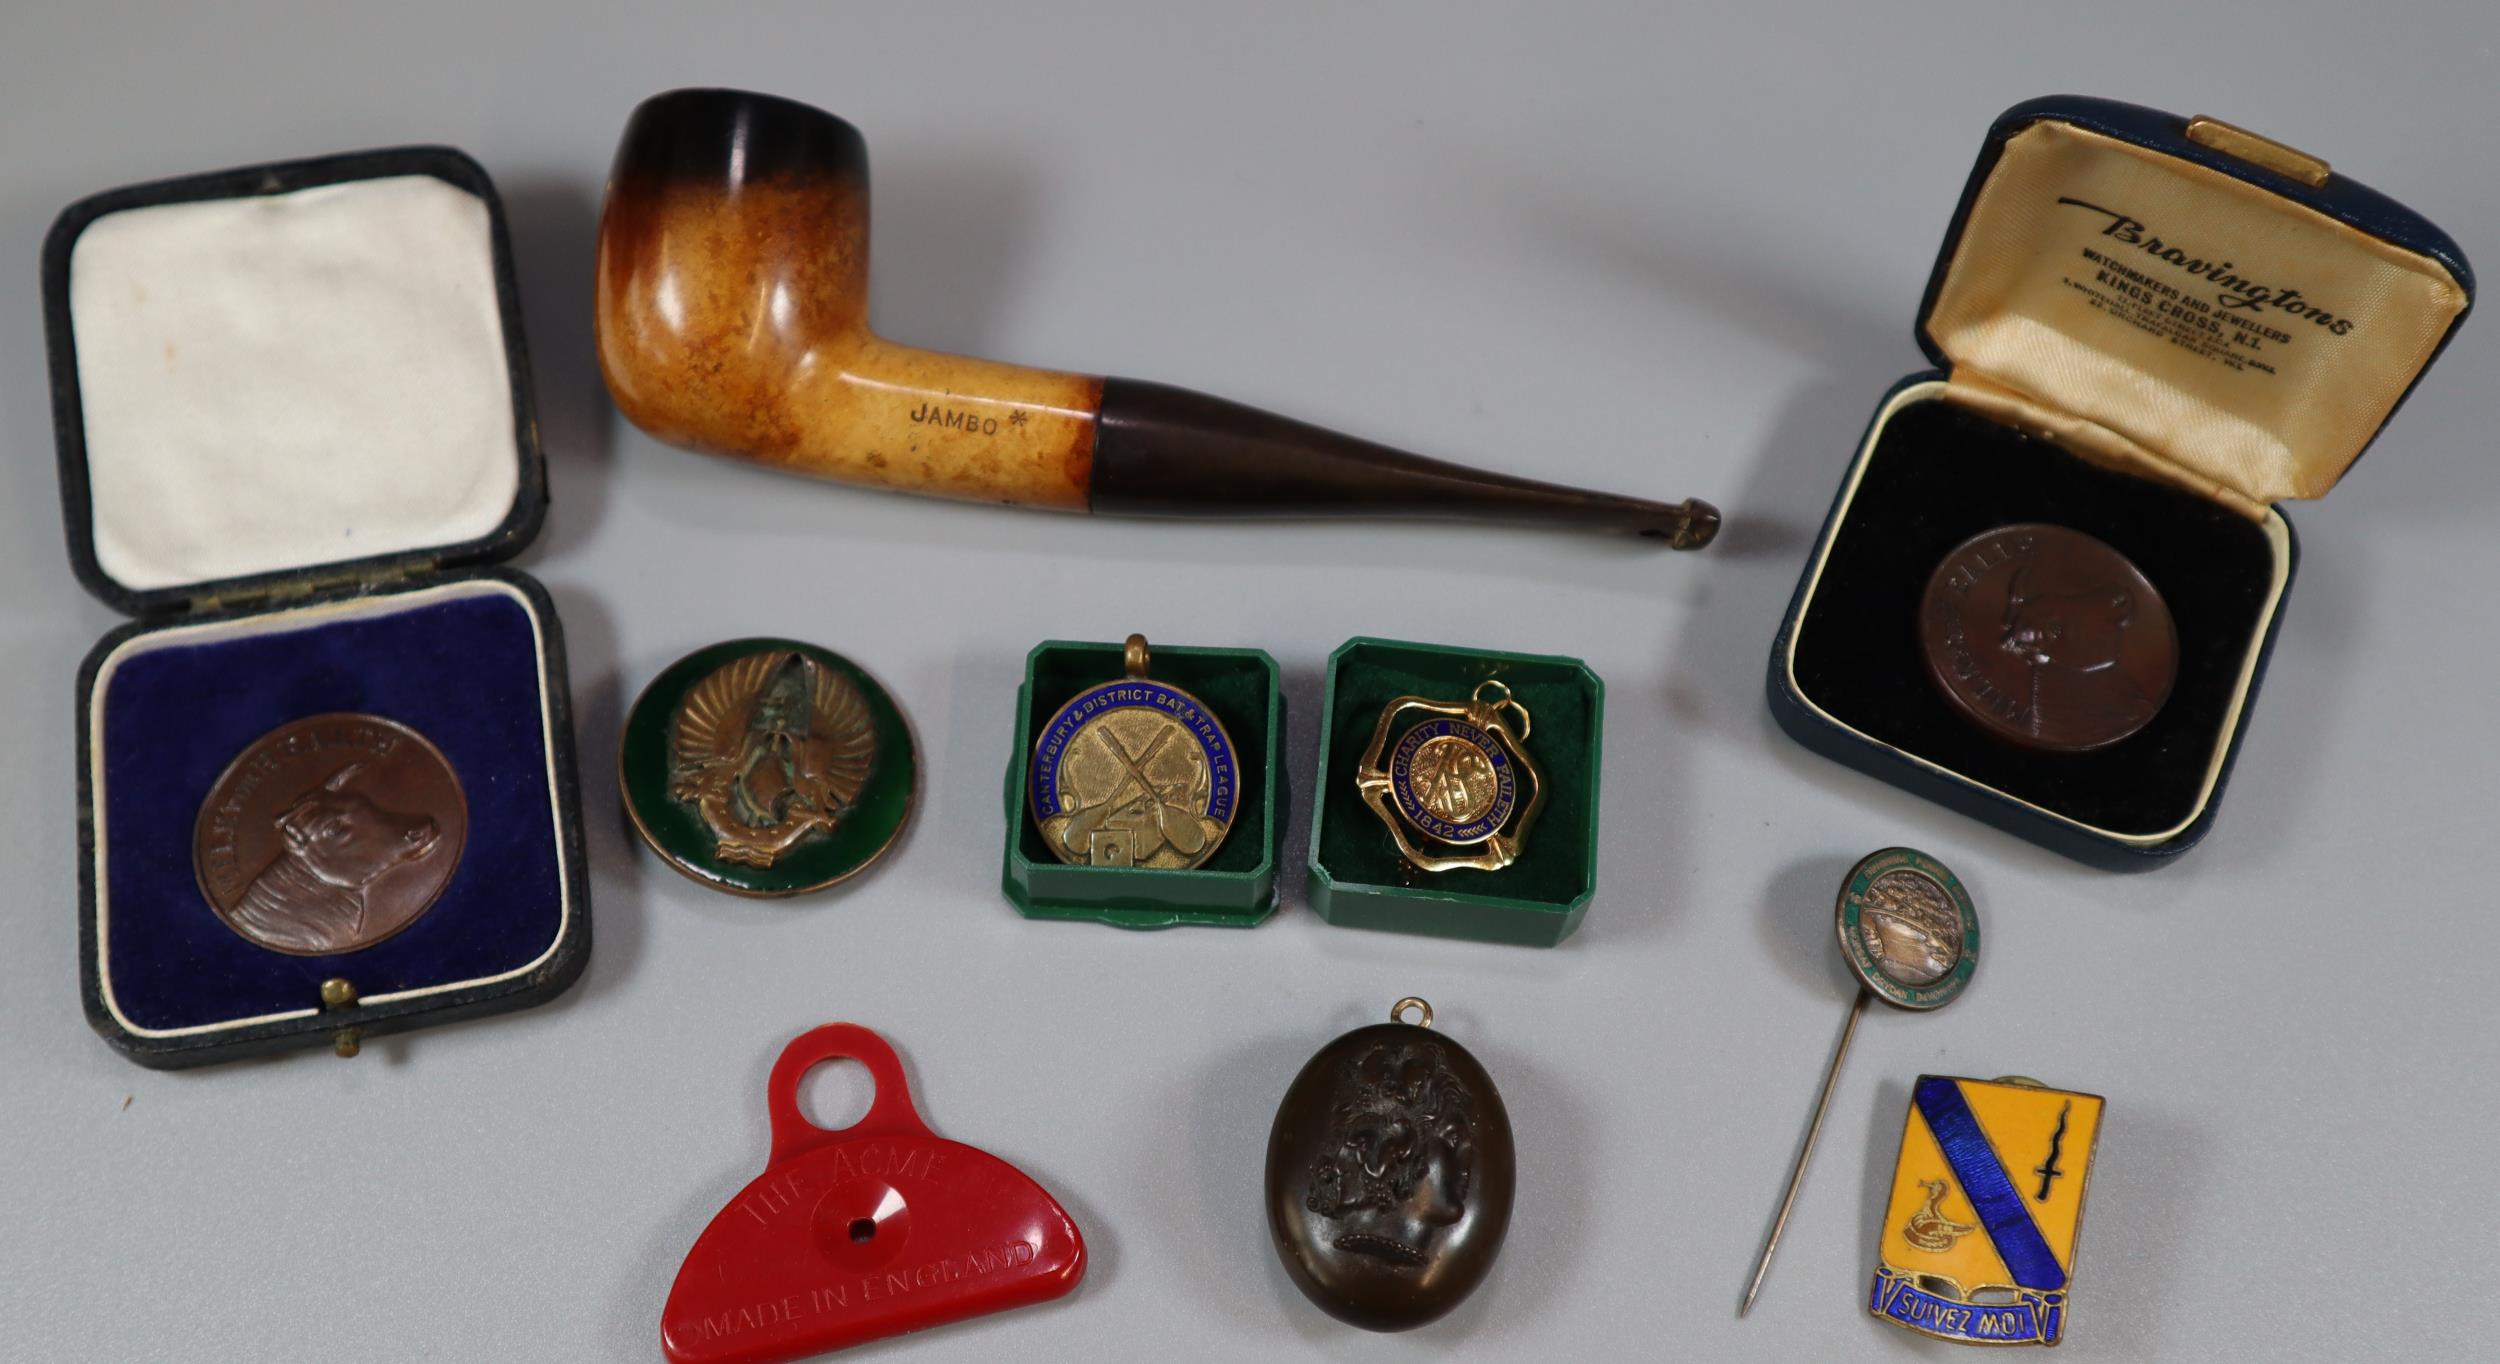 Plastic tub comprising Whitby Jet carved locket, ACME Shepherds Lip Whistle, Milk Drink for Health